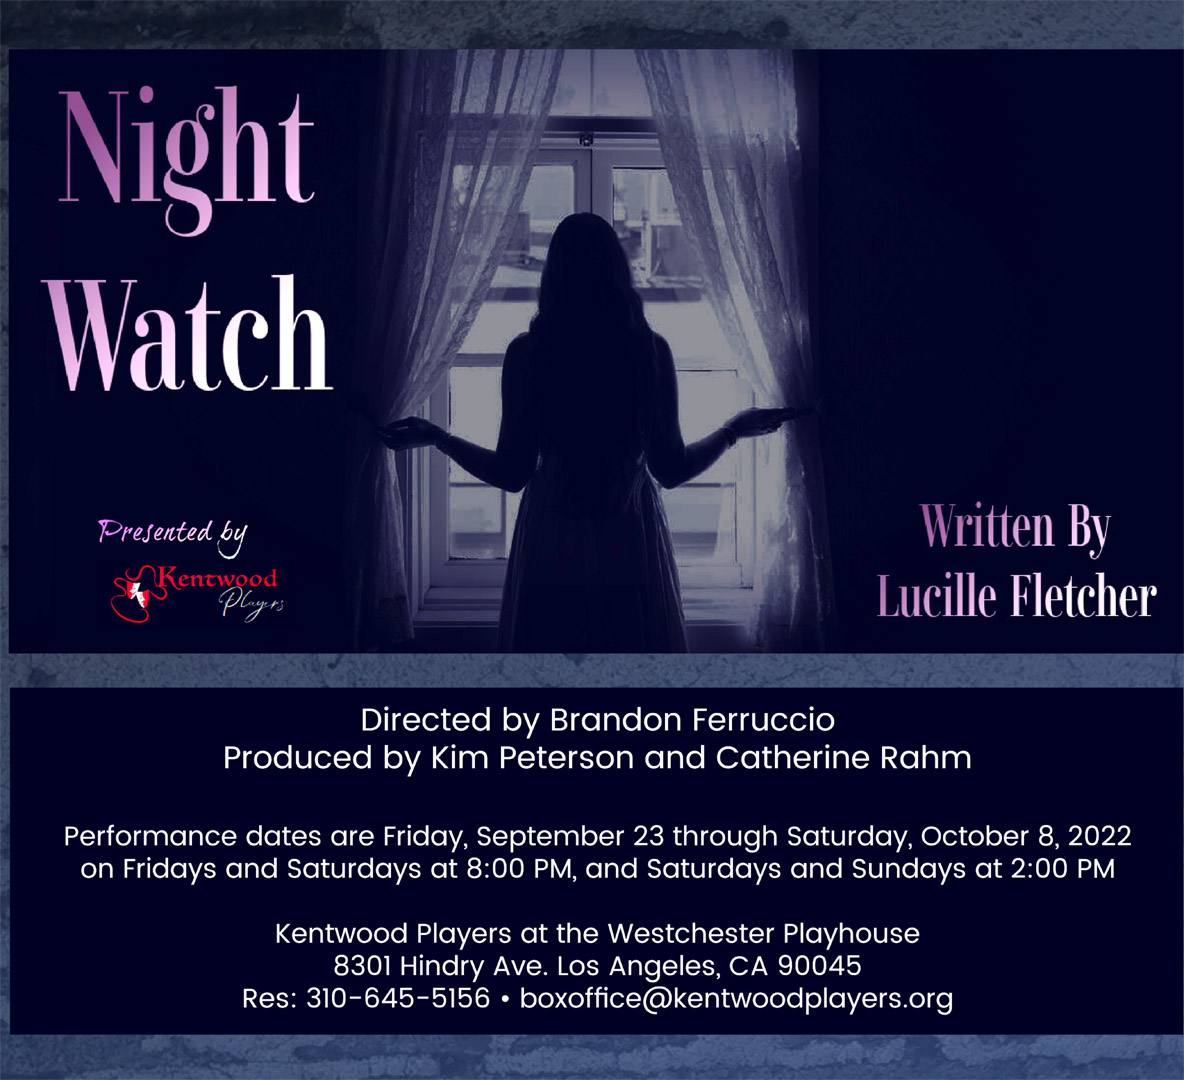 Night Watch at the Westchester Playhouse